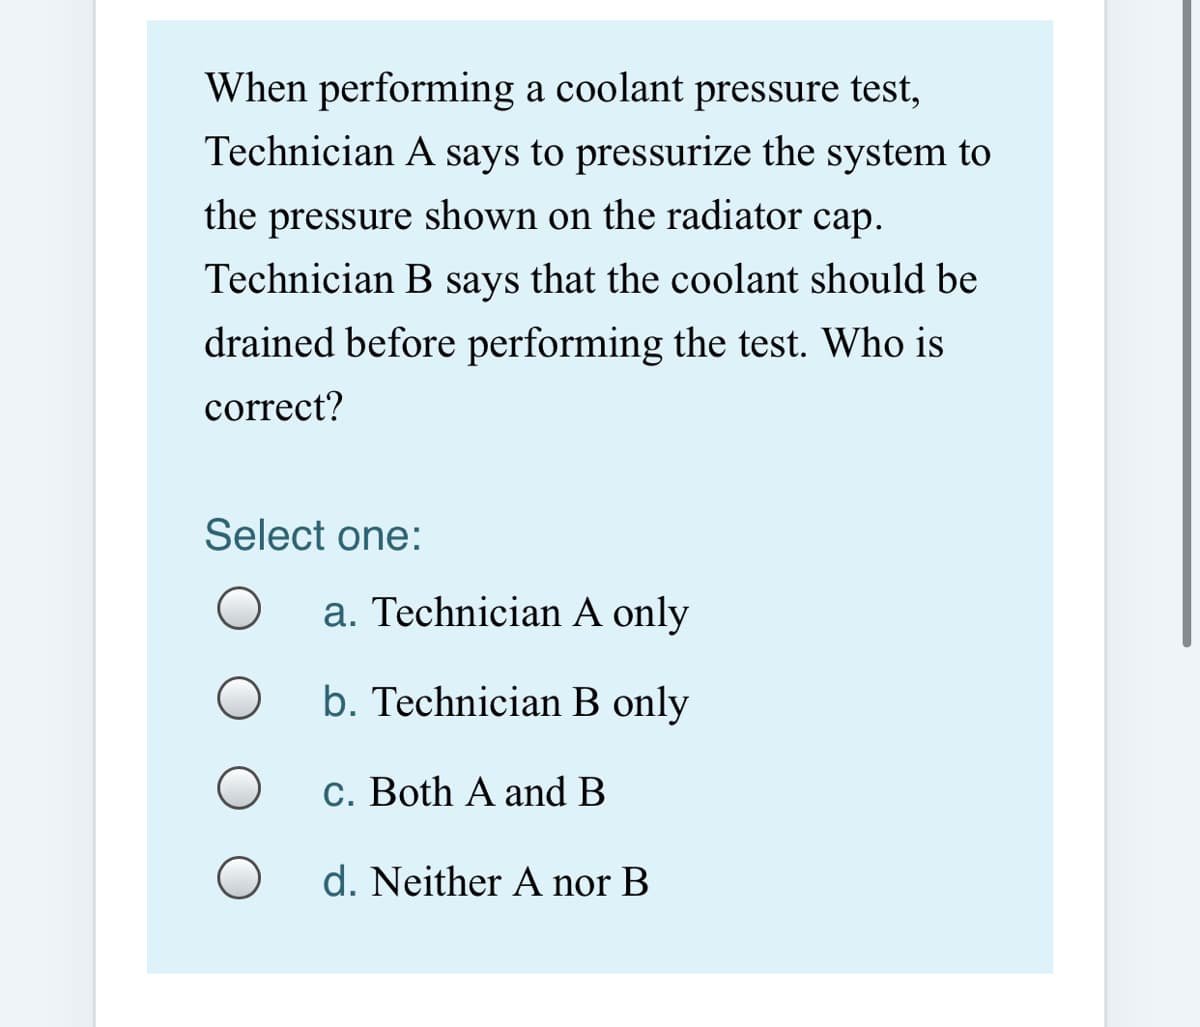 When performing a coolant pressure test,
Technician A says to pressurize the system to
the pressure shown on the radiator cap.
Technician B says that the coolant should be
drained before performing the test. Who is
correct?
Select one:
a. Technician A only
b. Technician B only
c. Both A and B
d. Neither A nor B
